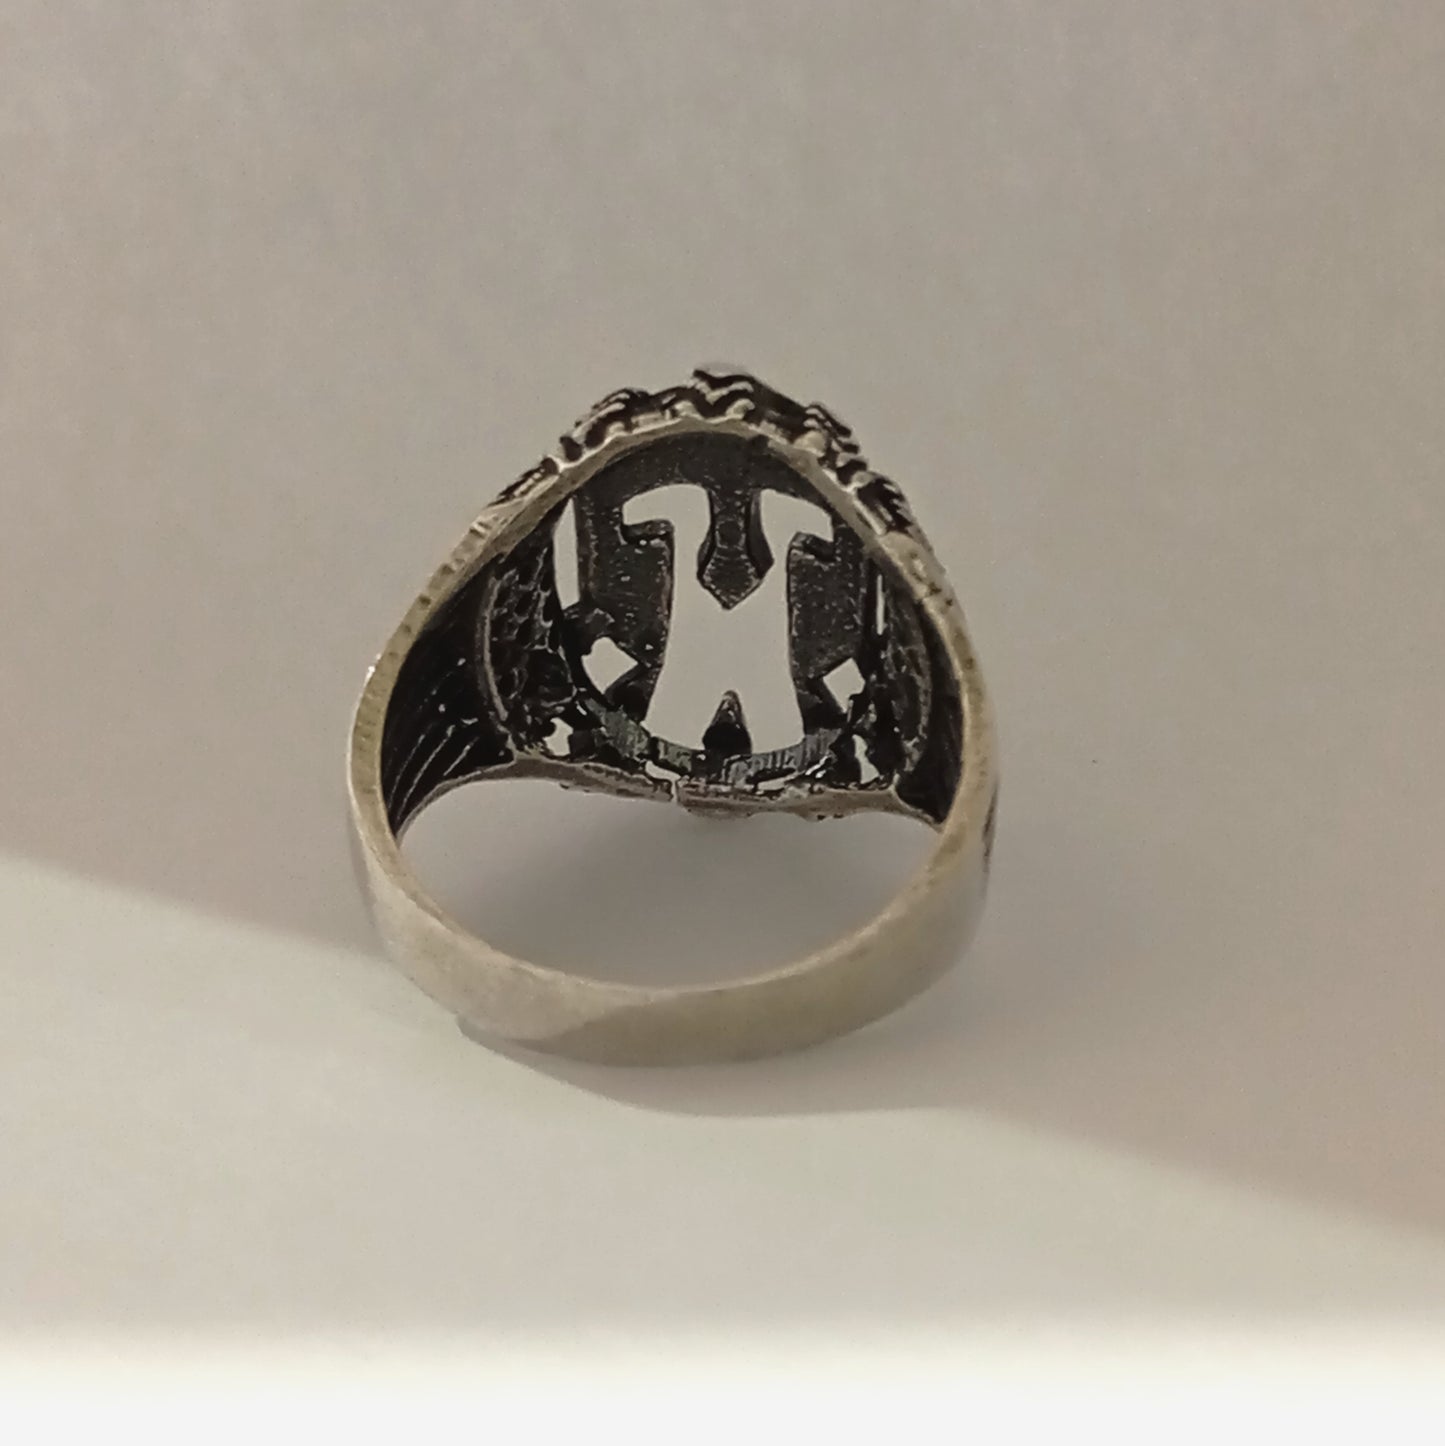 Spartan Helmet - King Leonidas - 300 Spartans - Battle of Thermopylae - 480 BC - Ring - Size EU 62 - Size US 10 - 925 Sterling Silver